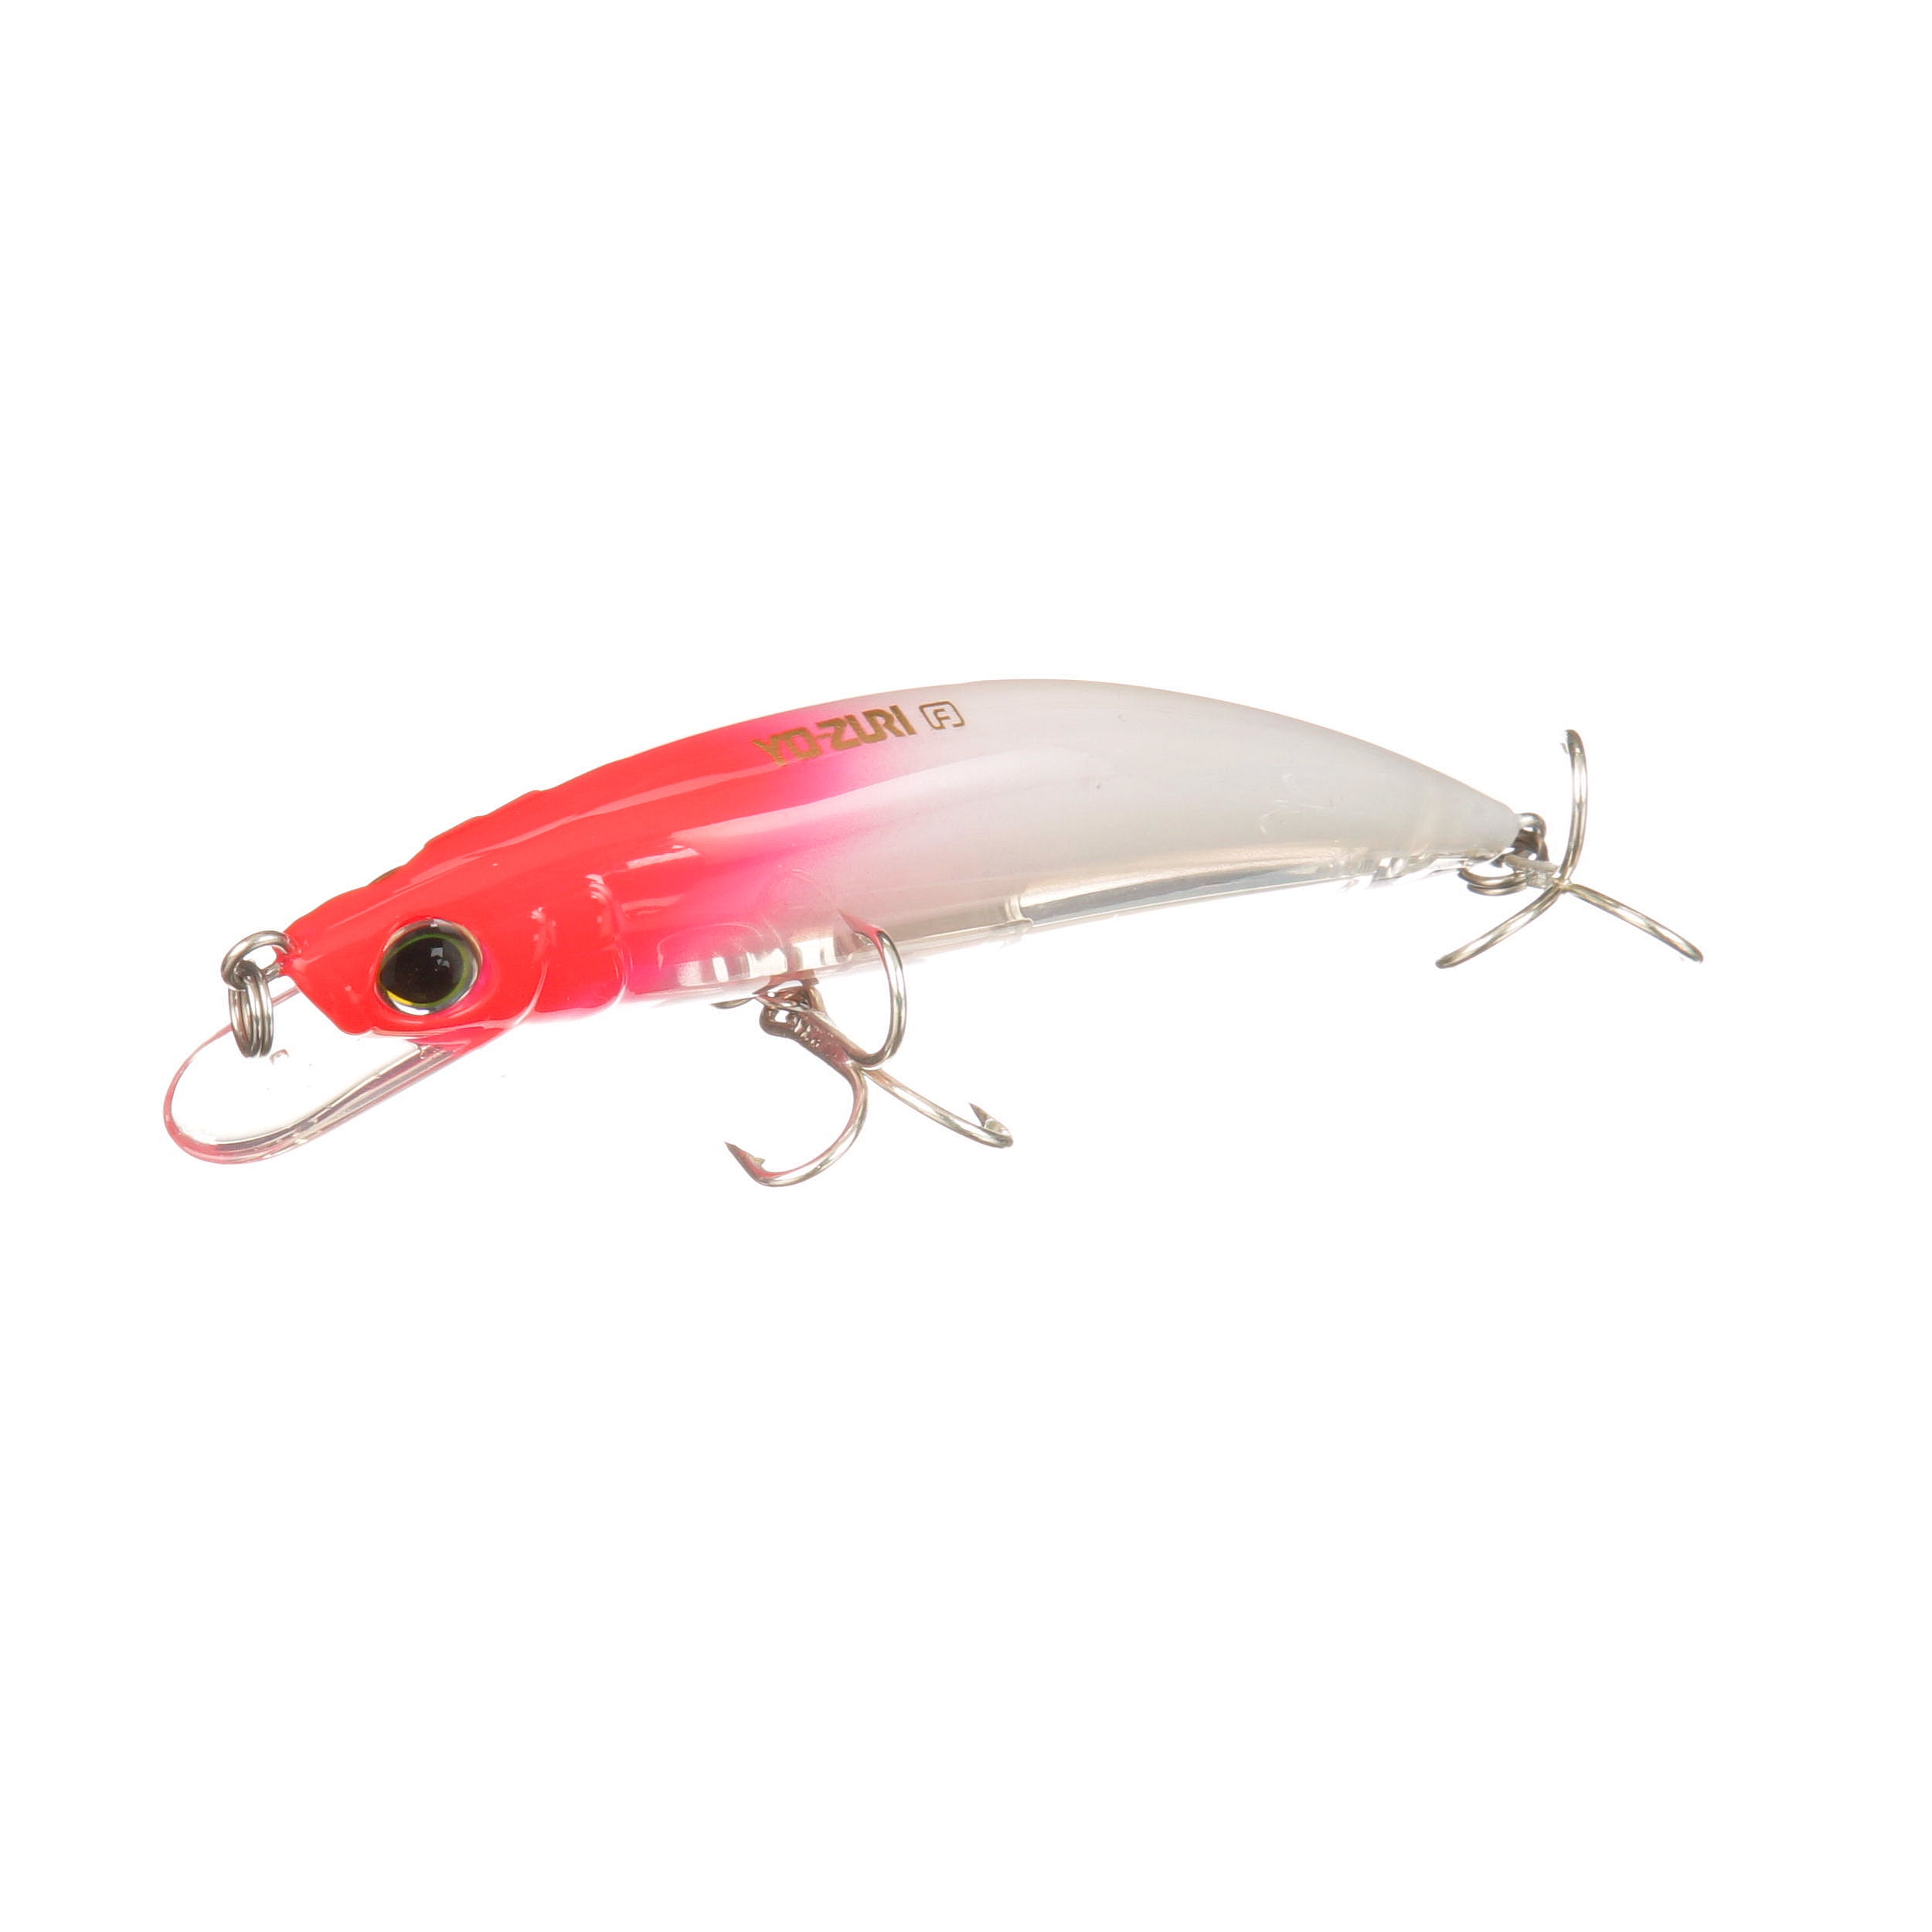 YO-ZURI 3DS Top Water Floating Popper Bait Lure 1/4 oz Fire Hot Tiger NEW! 